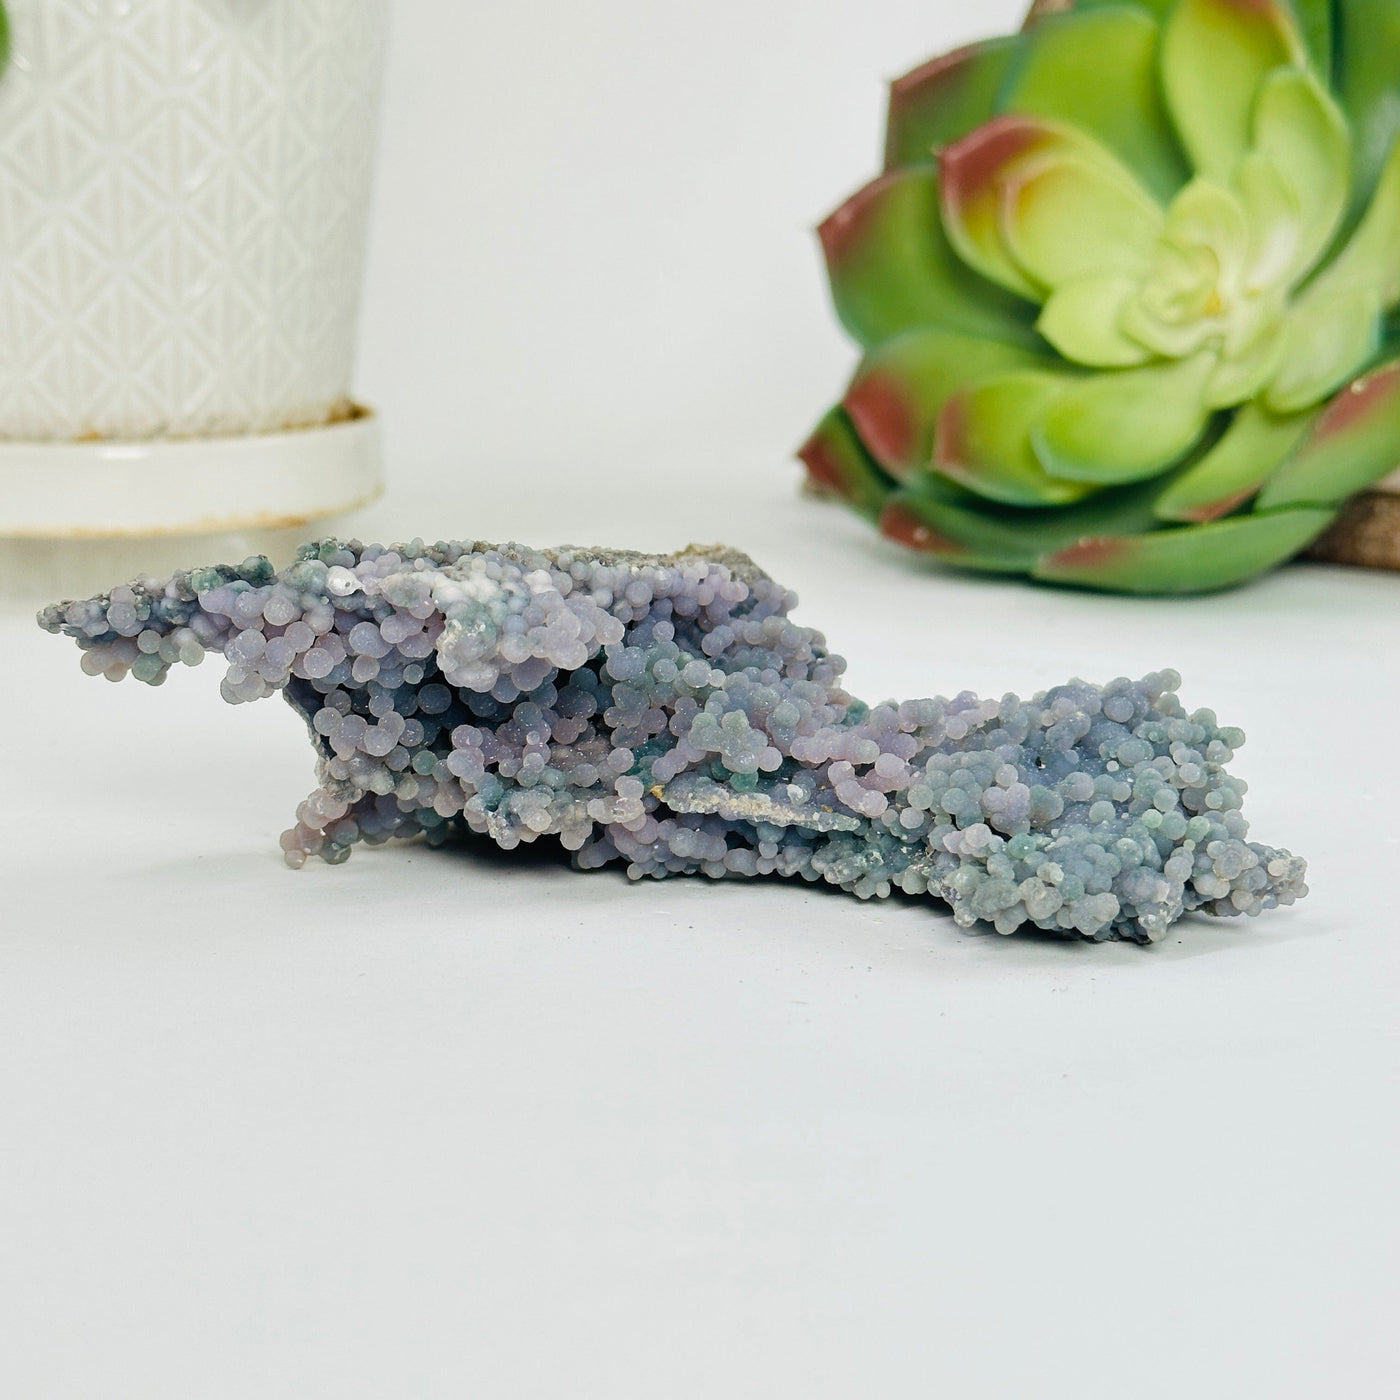 grape agate cluster with decorations in the background